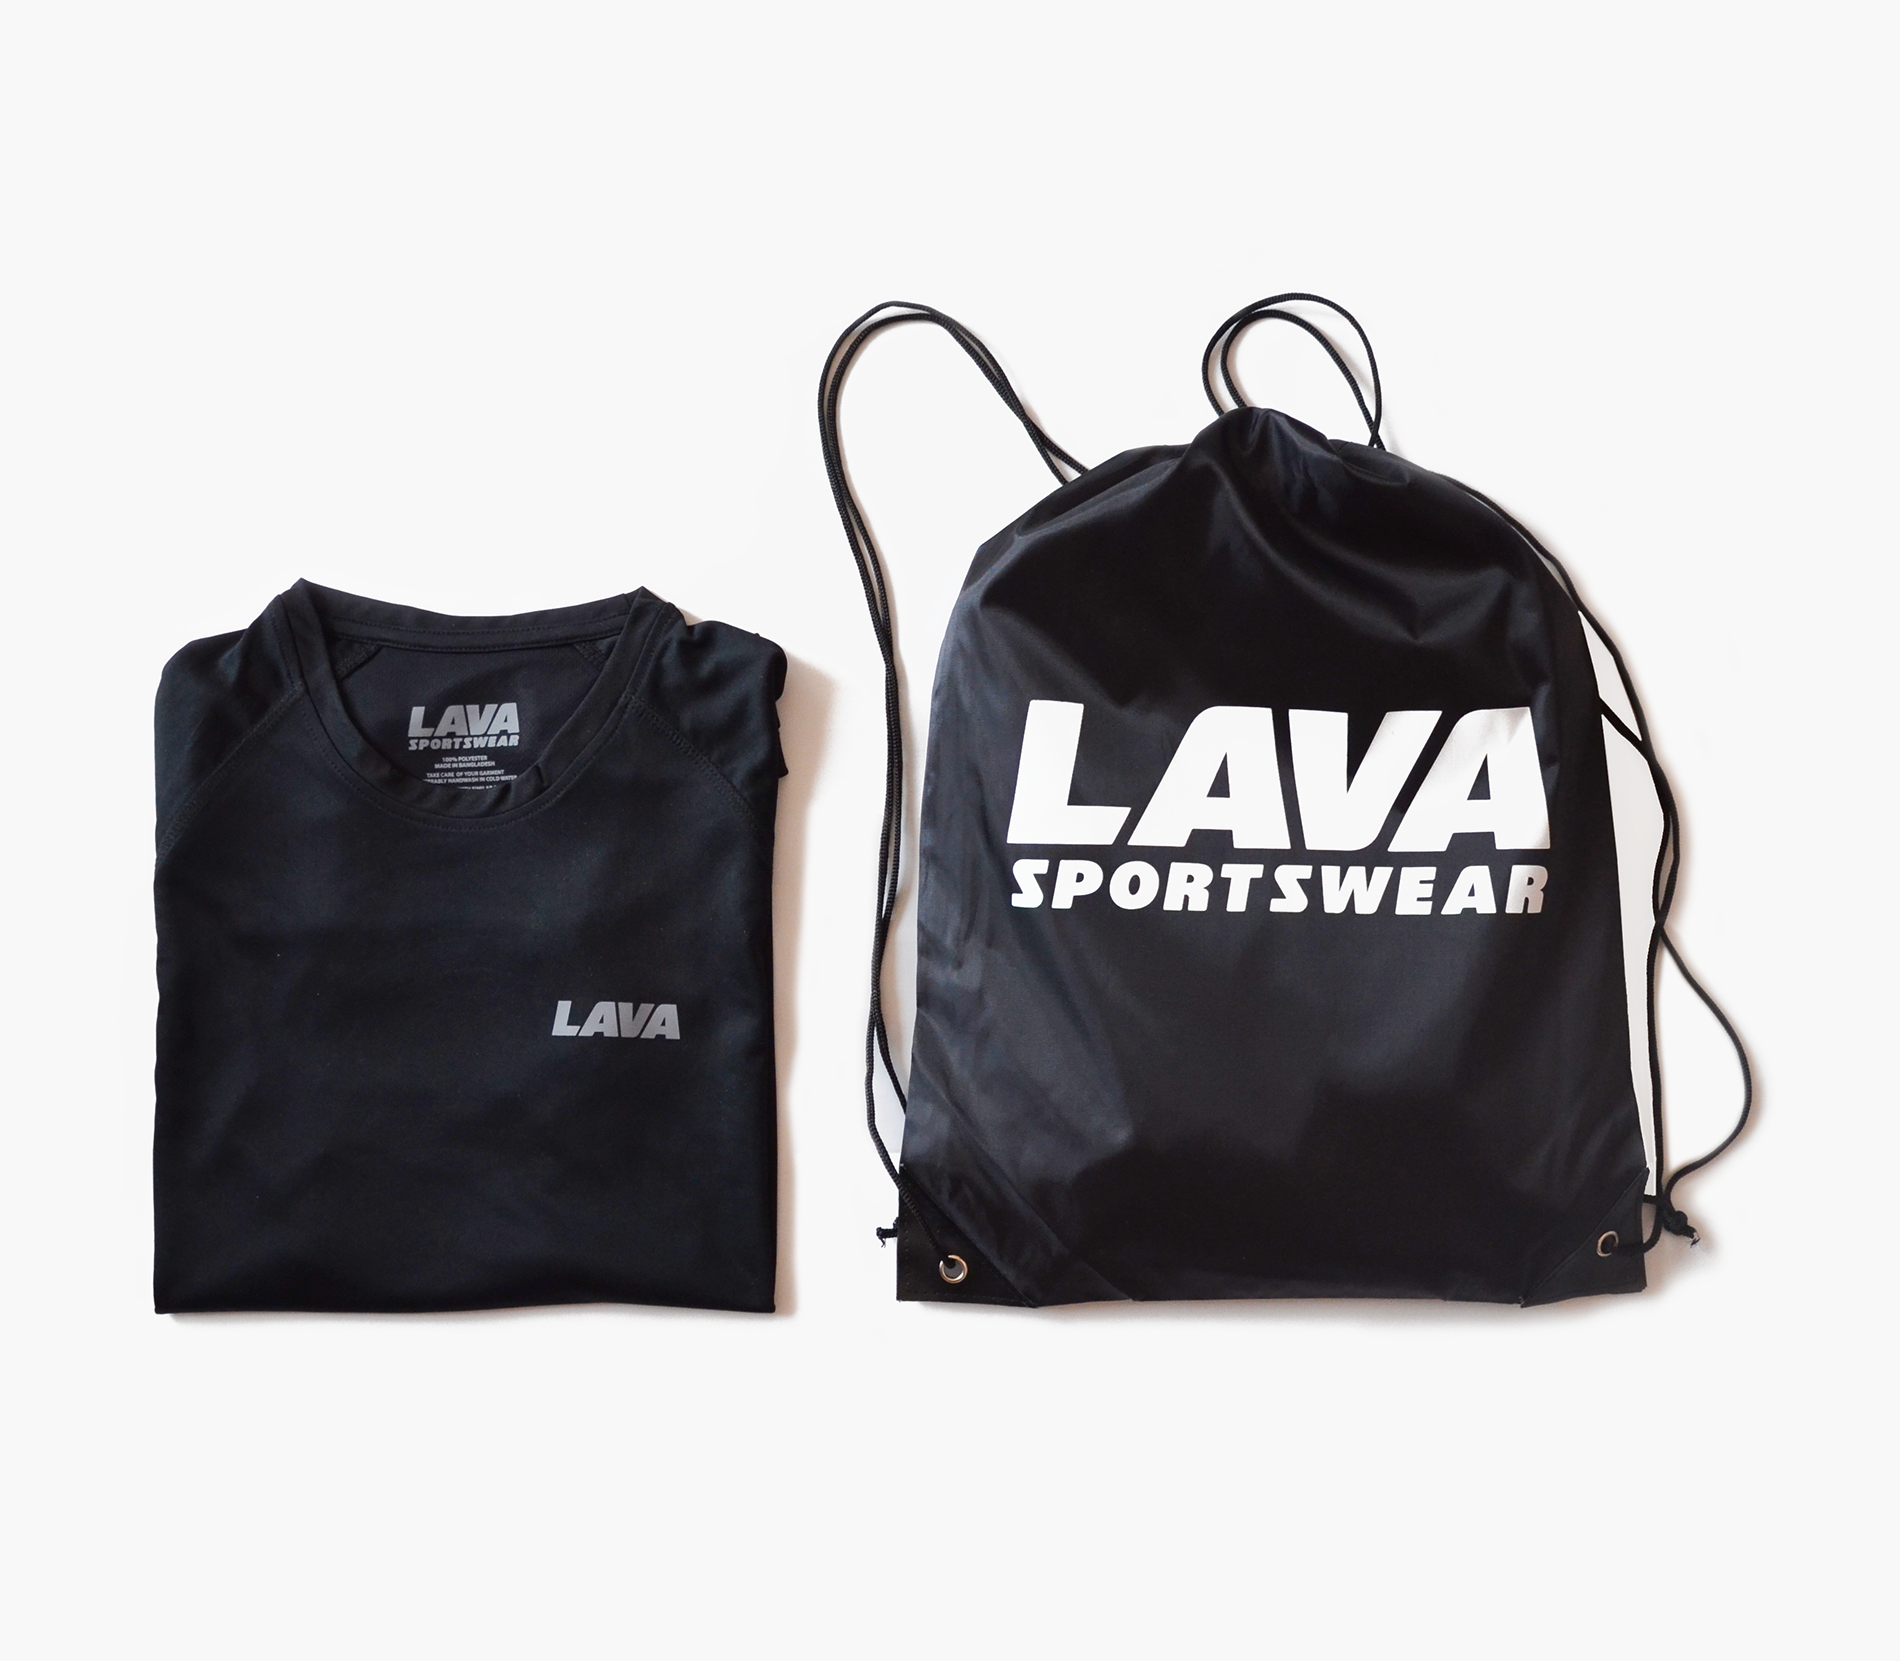 lava active and outdoor gear online